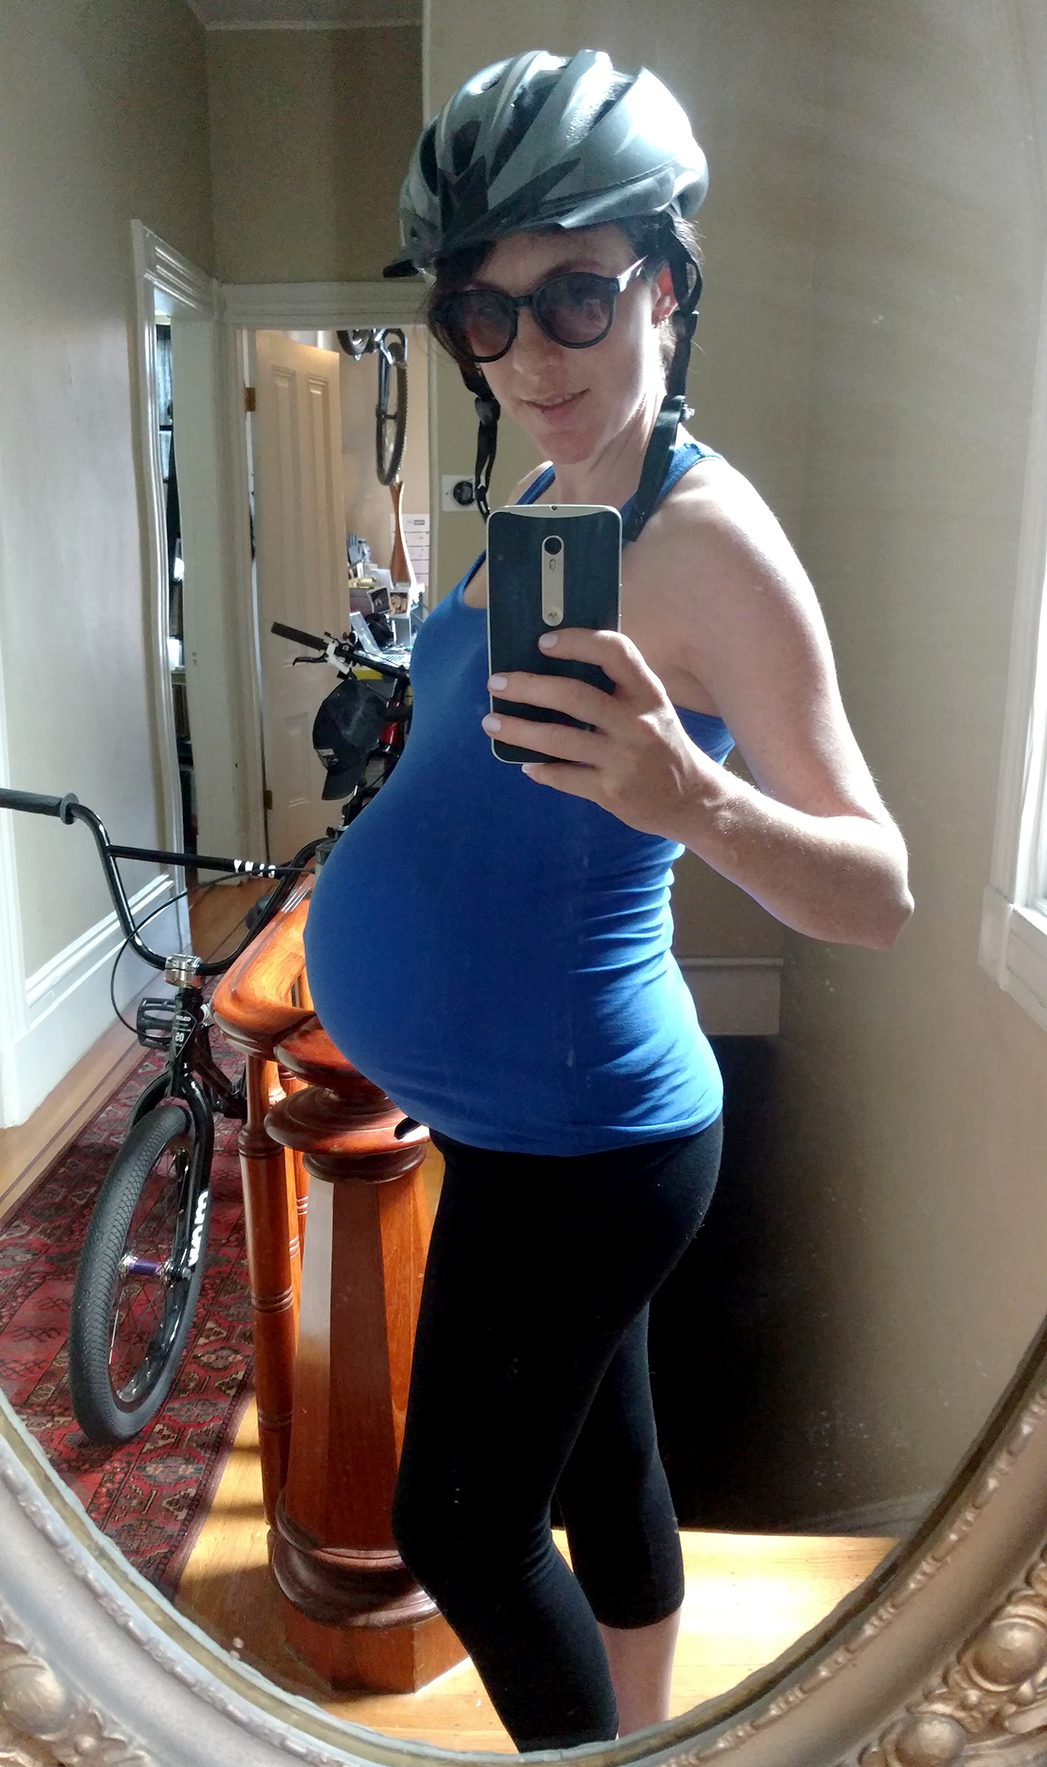 Biking outfit 8 months pregnant